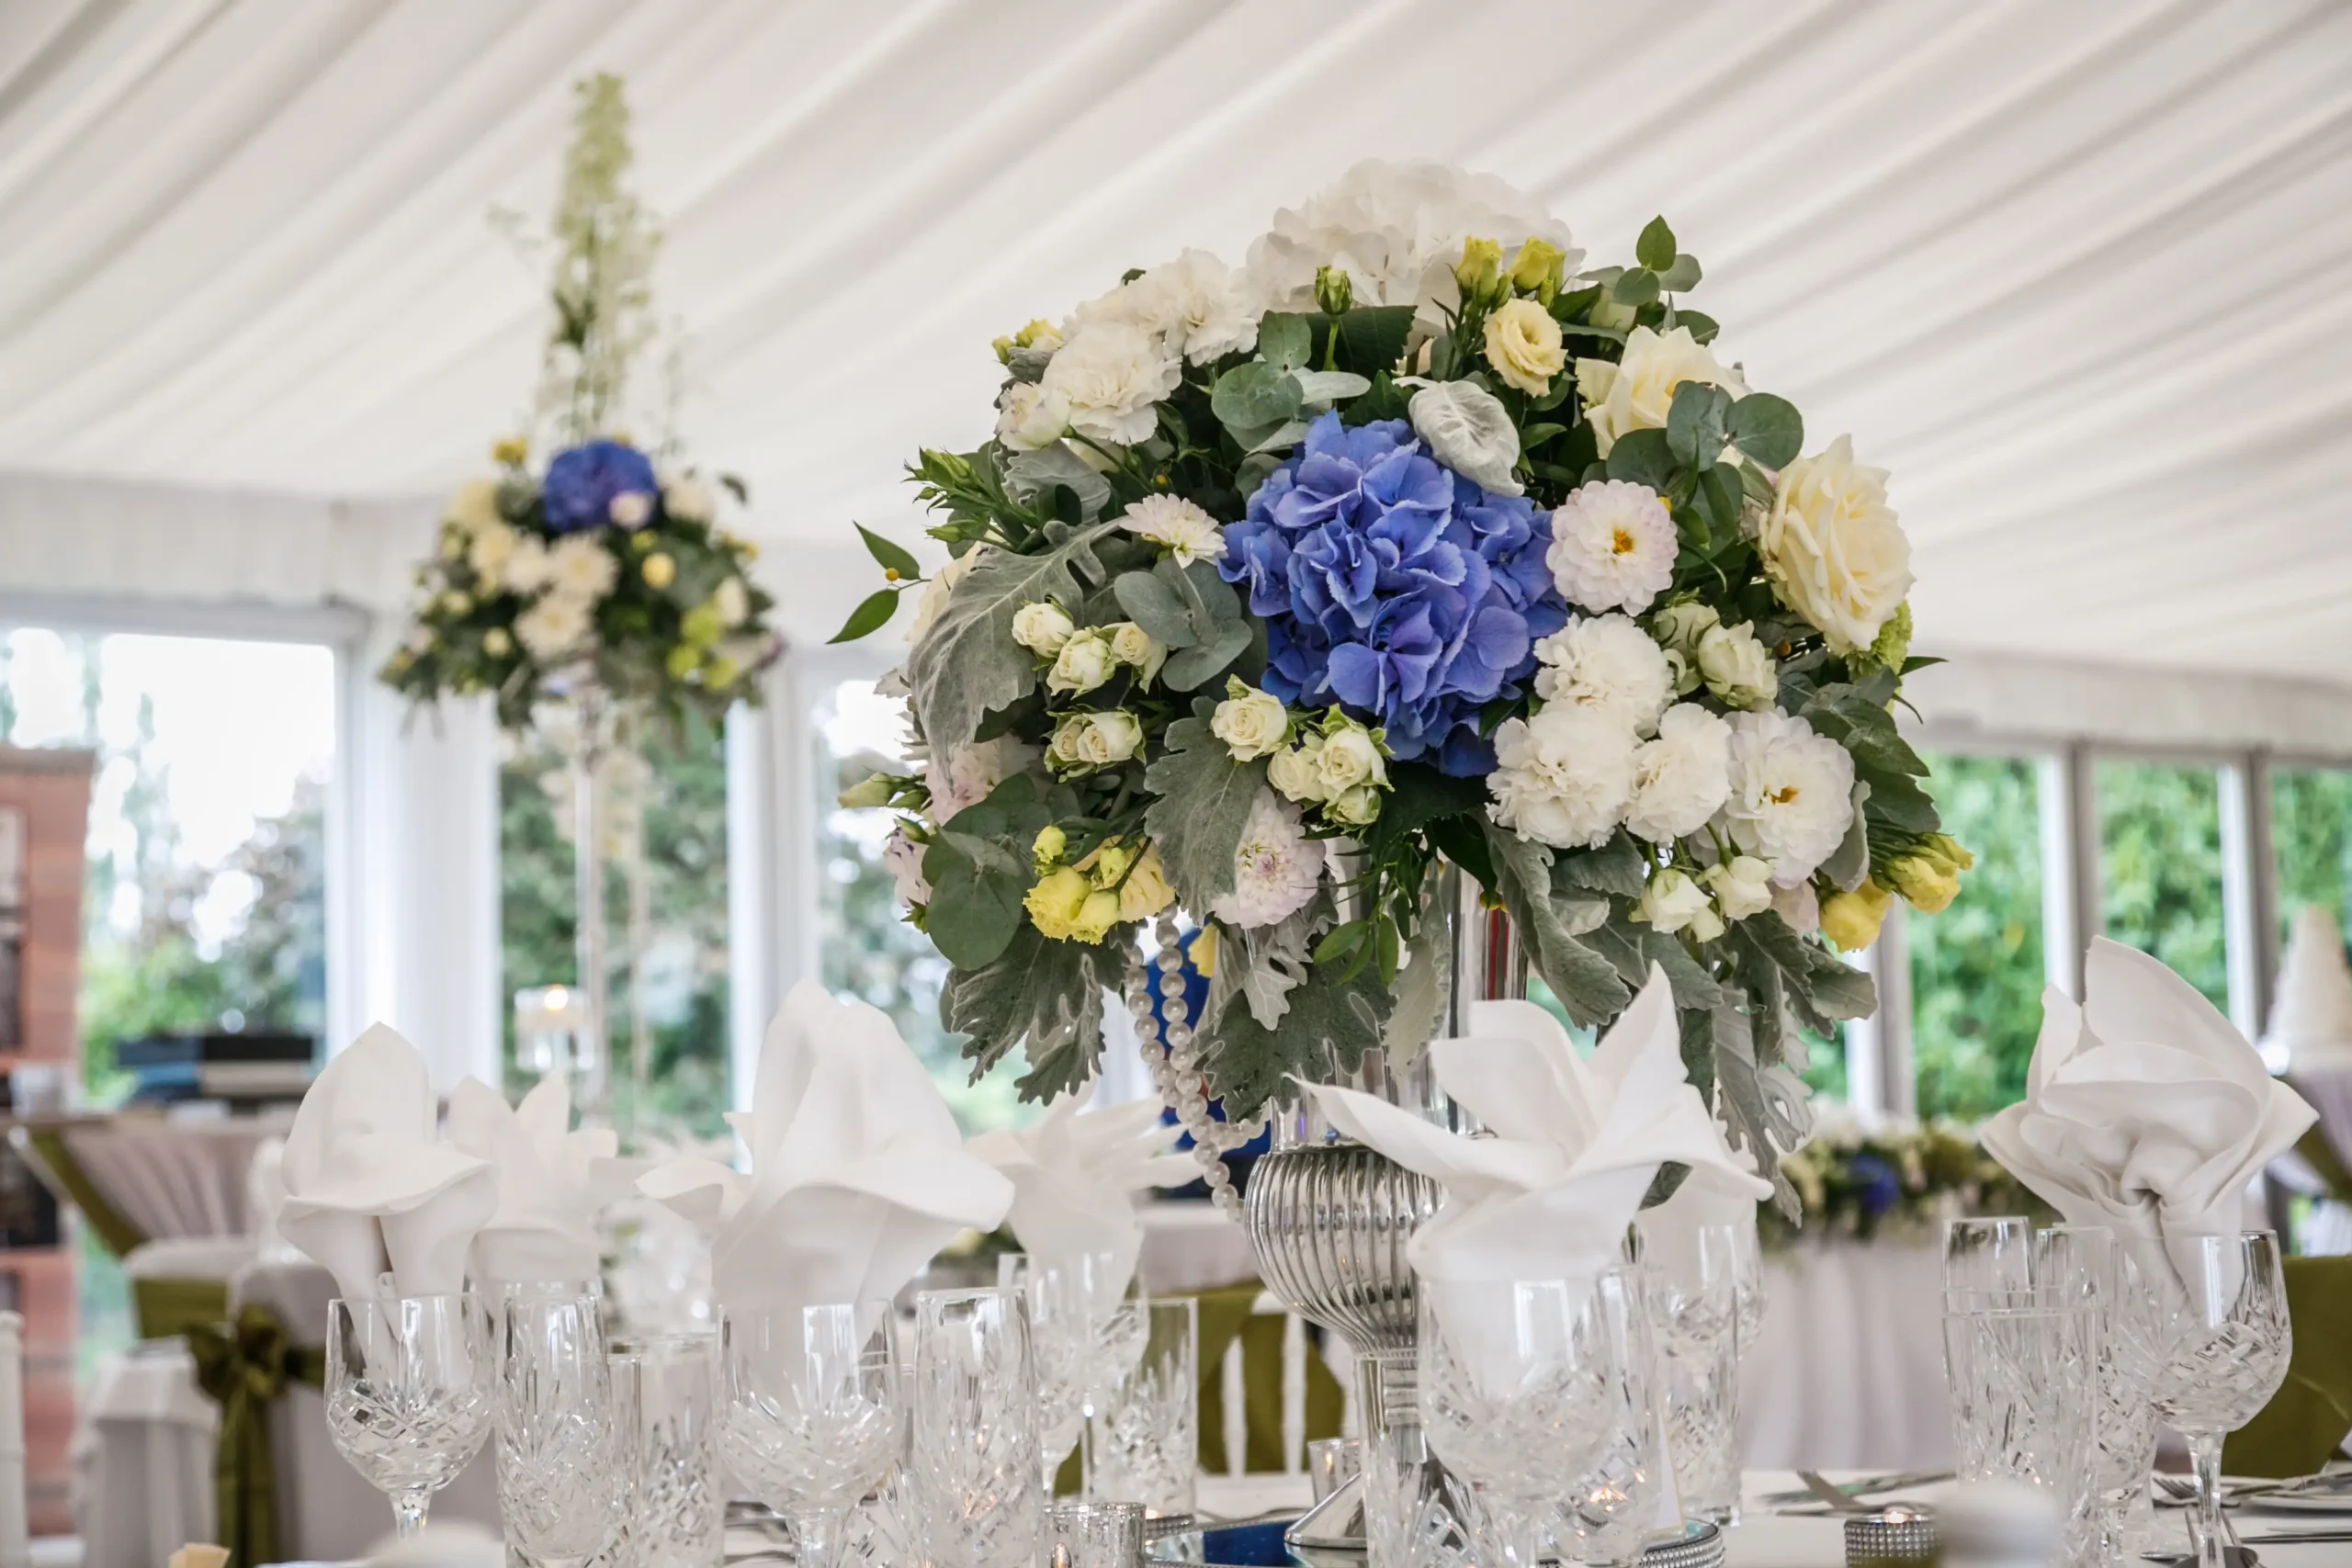 Reception room tables decorated with large centrepiece bouquet